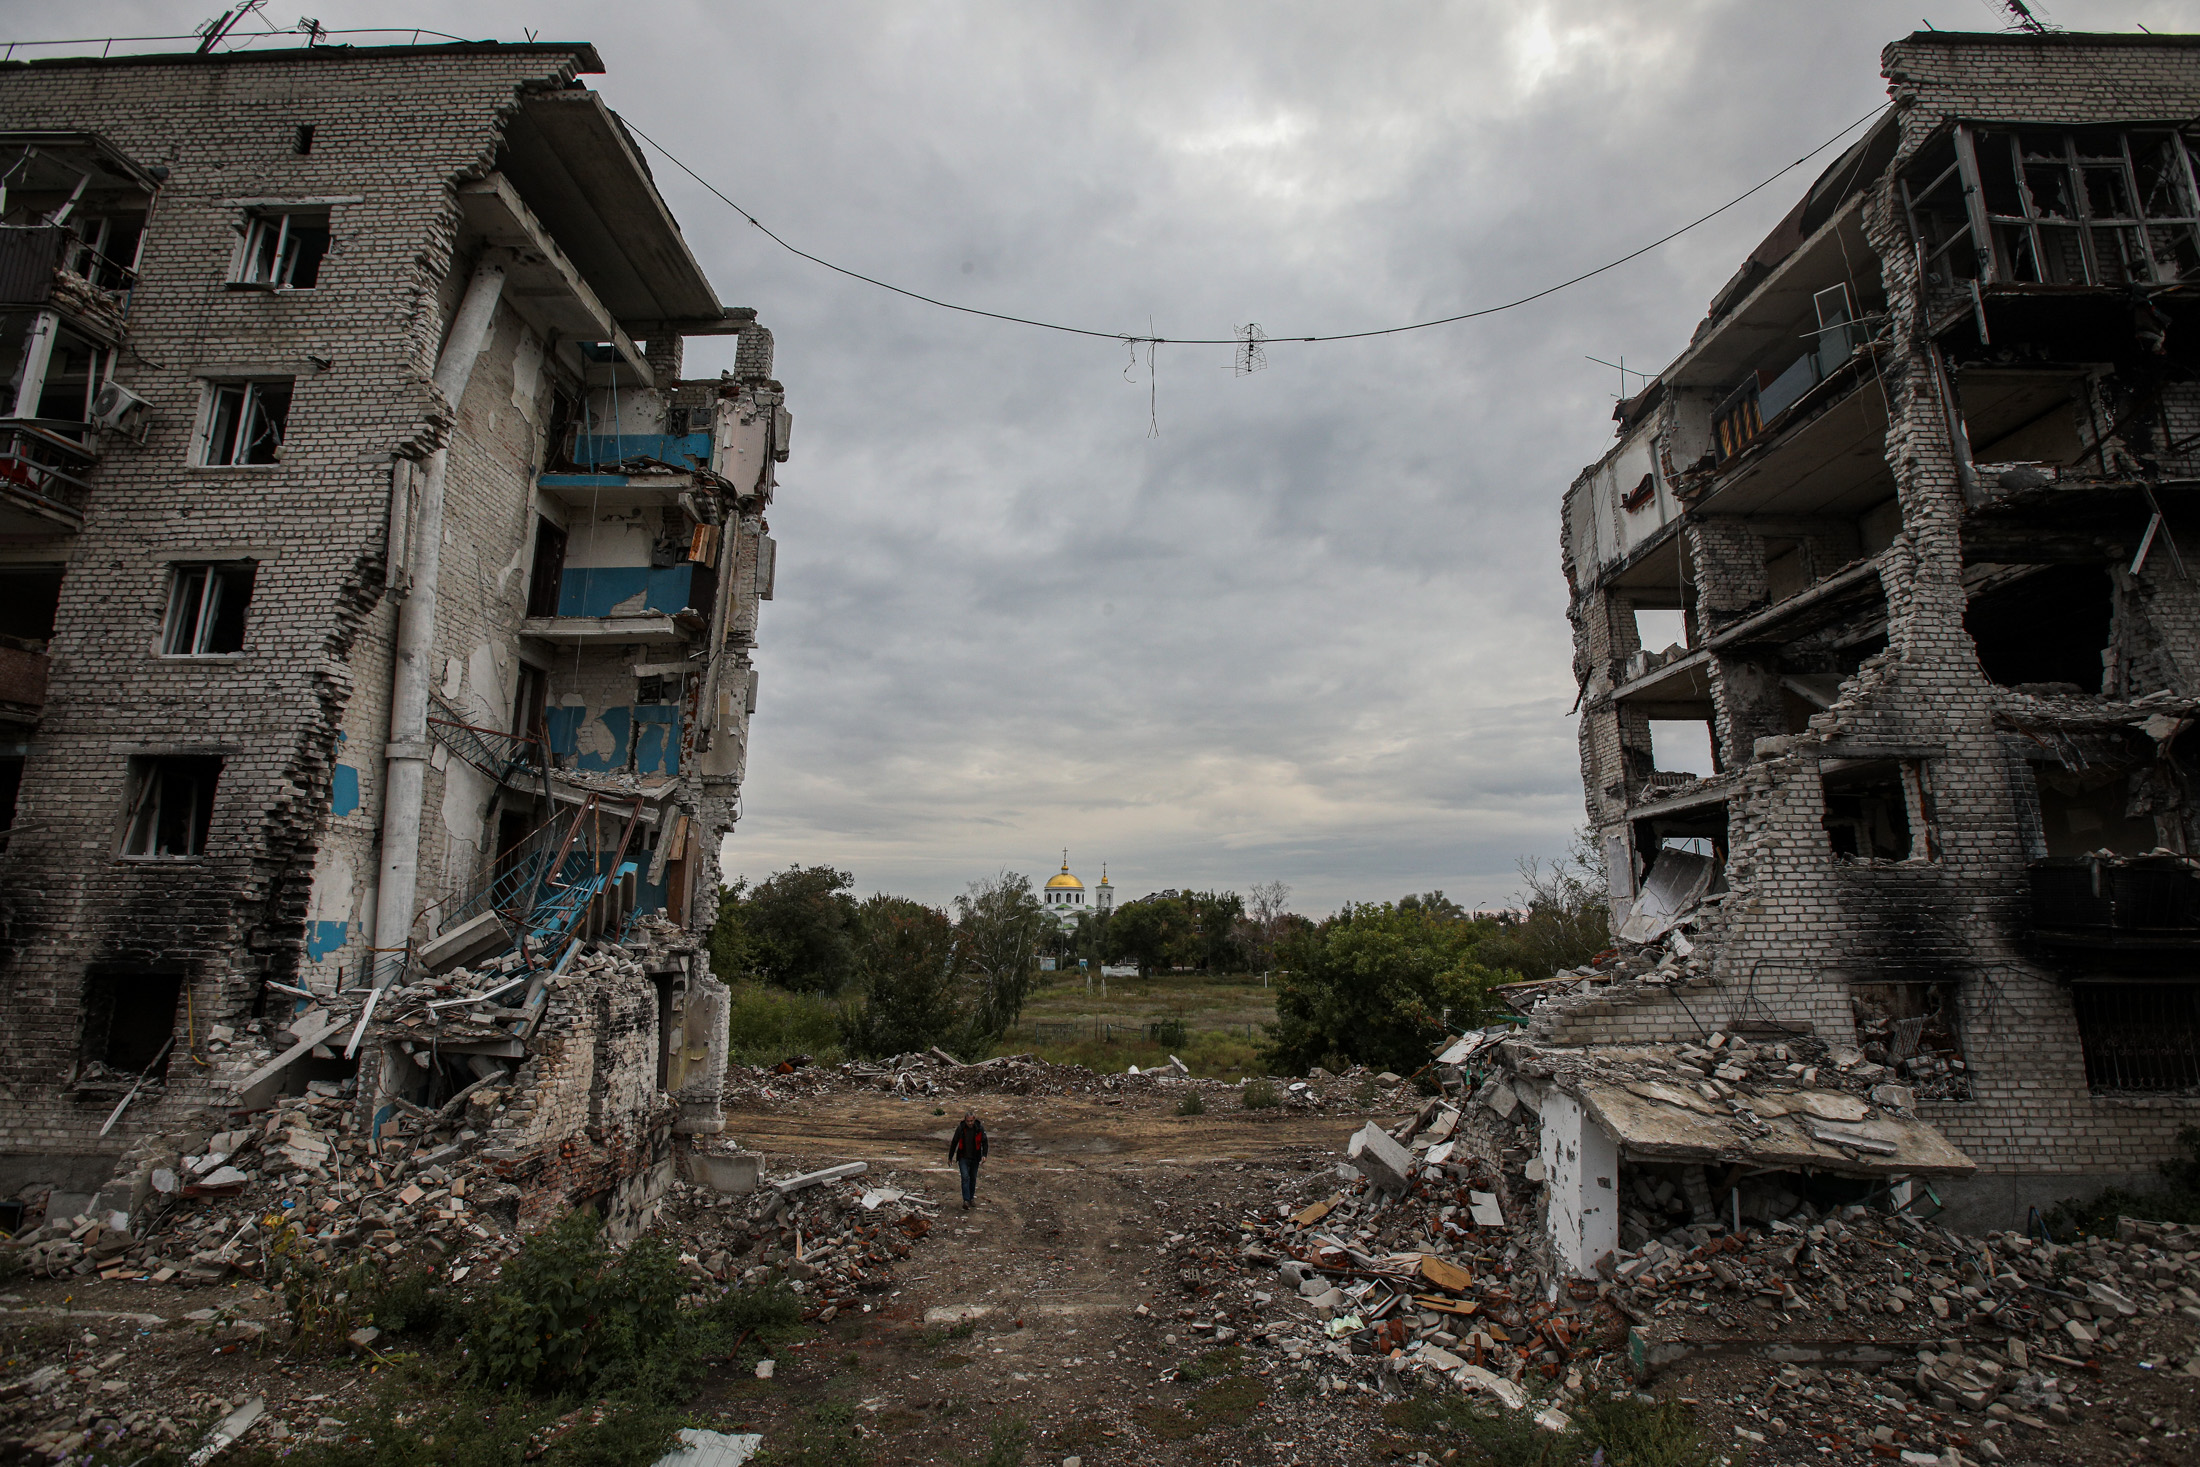 Ukrainians emerge from a 6-month nightmare in newly liberated territories